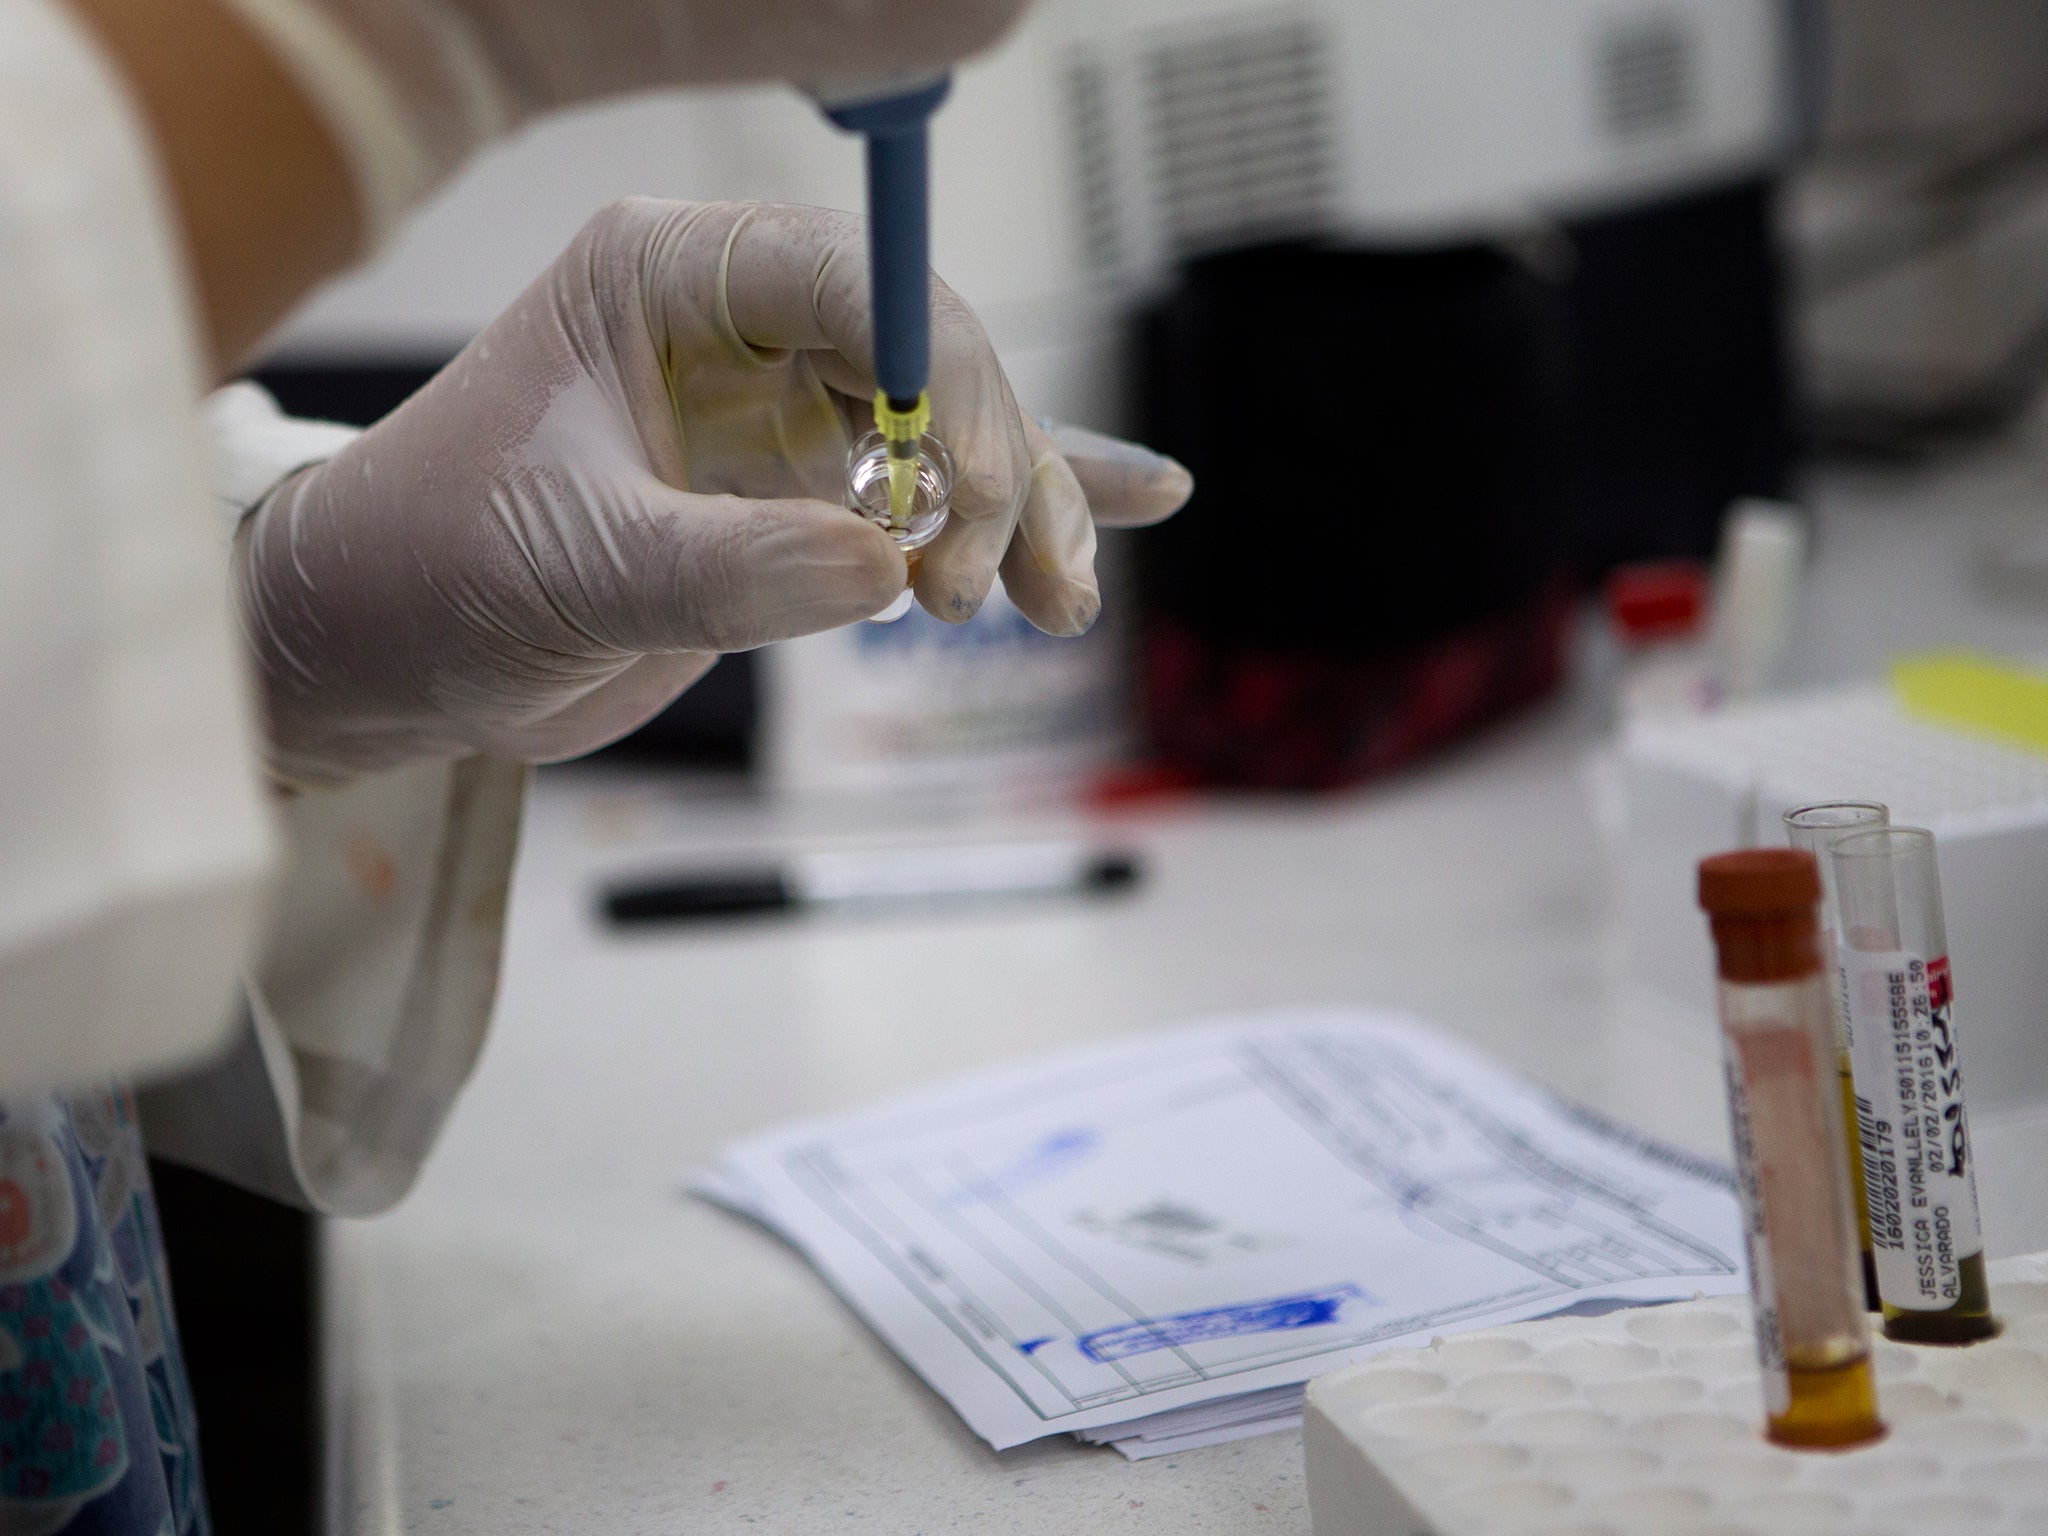 A blood sample is taken from a suspected Zika virus victim, during last year's outbreak